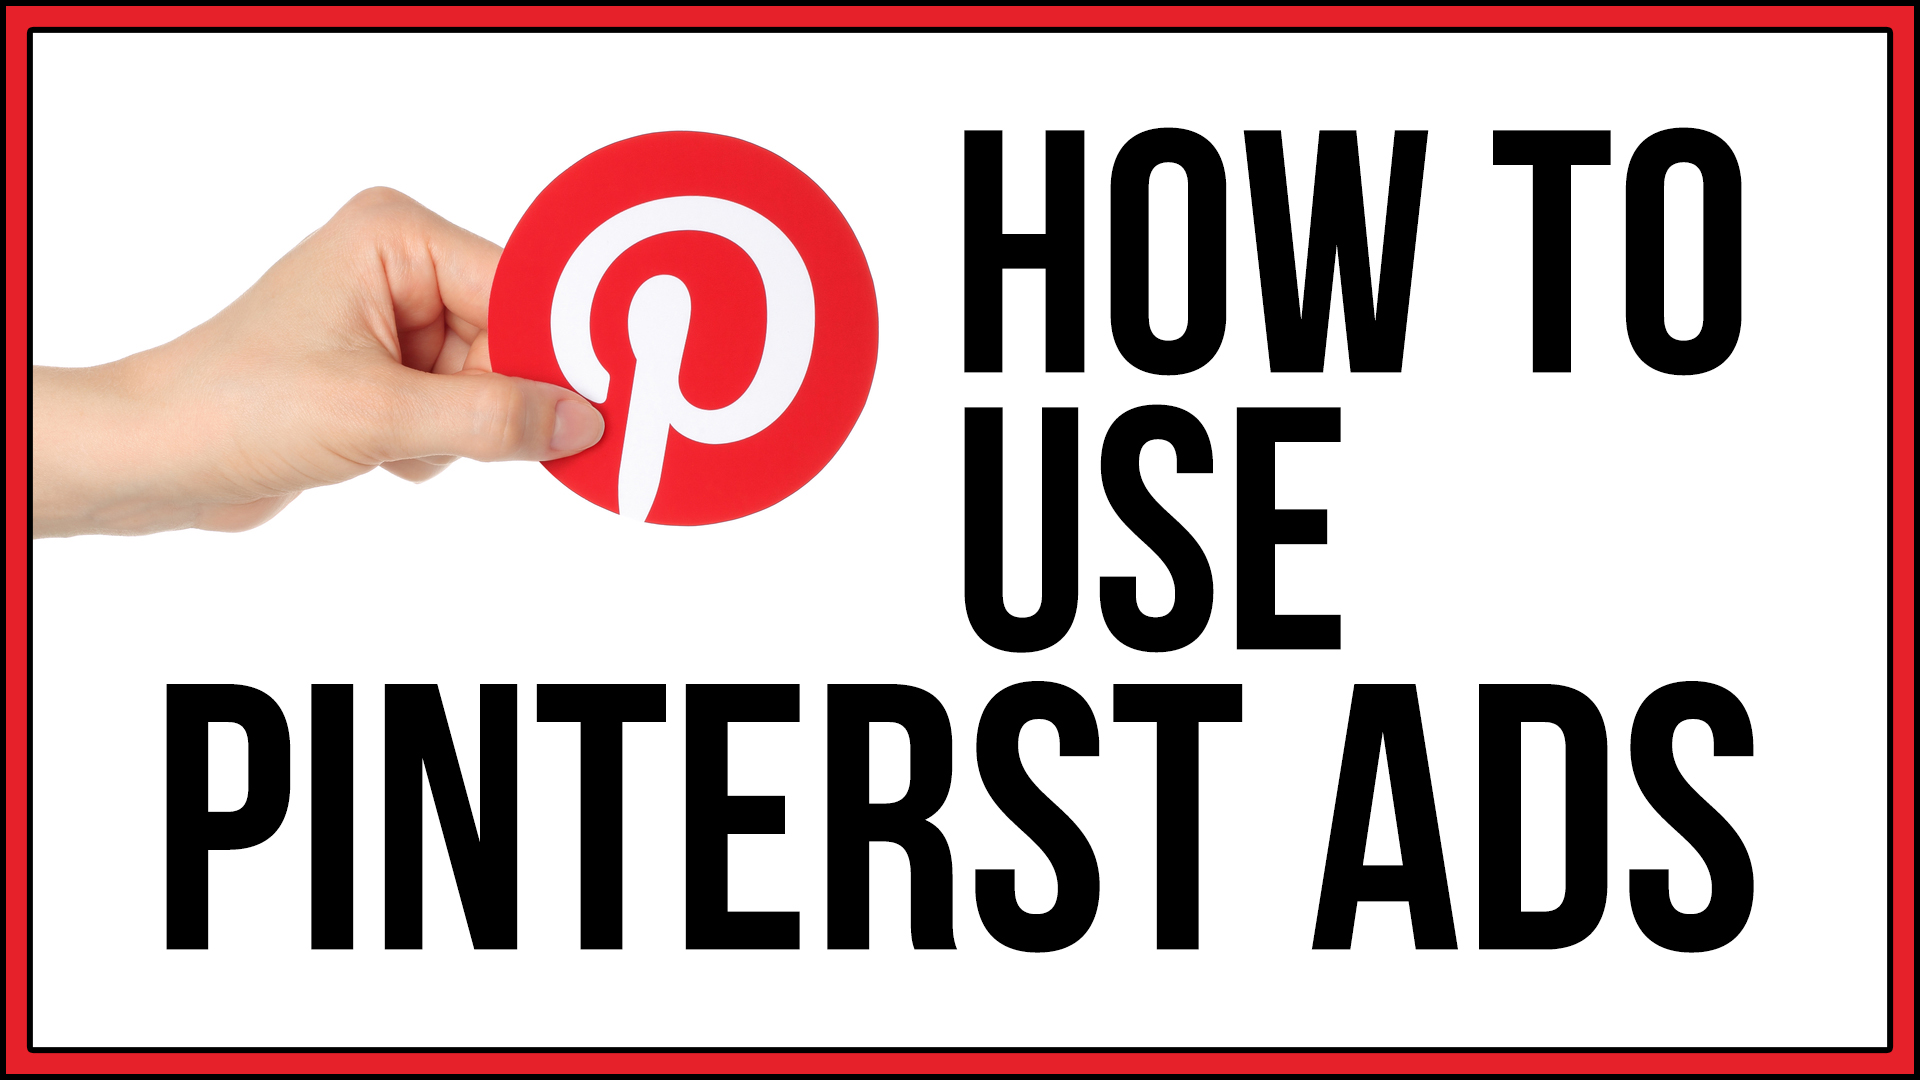 How To Use Pinterest Ads - Sign - HD Wallpaper 